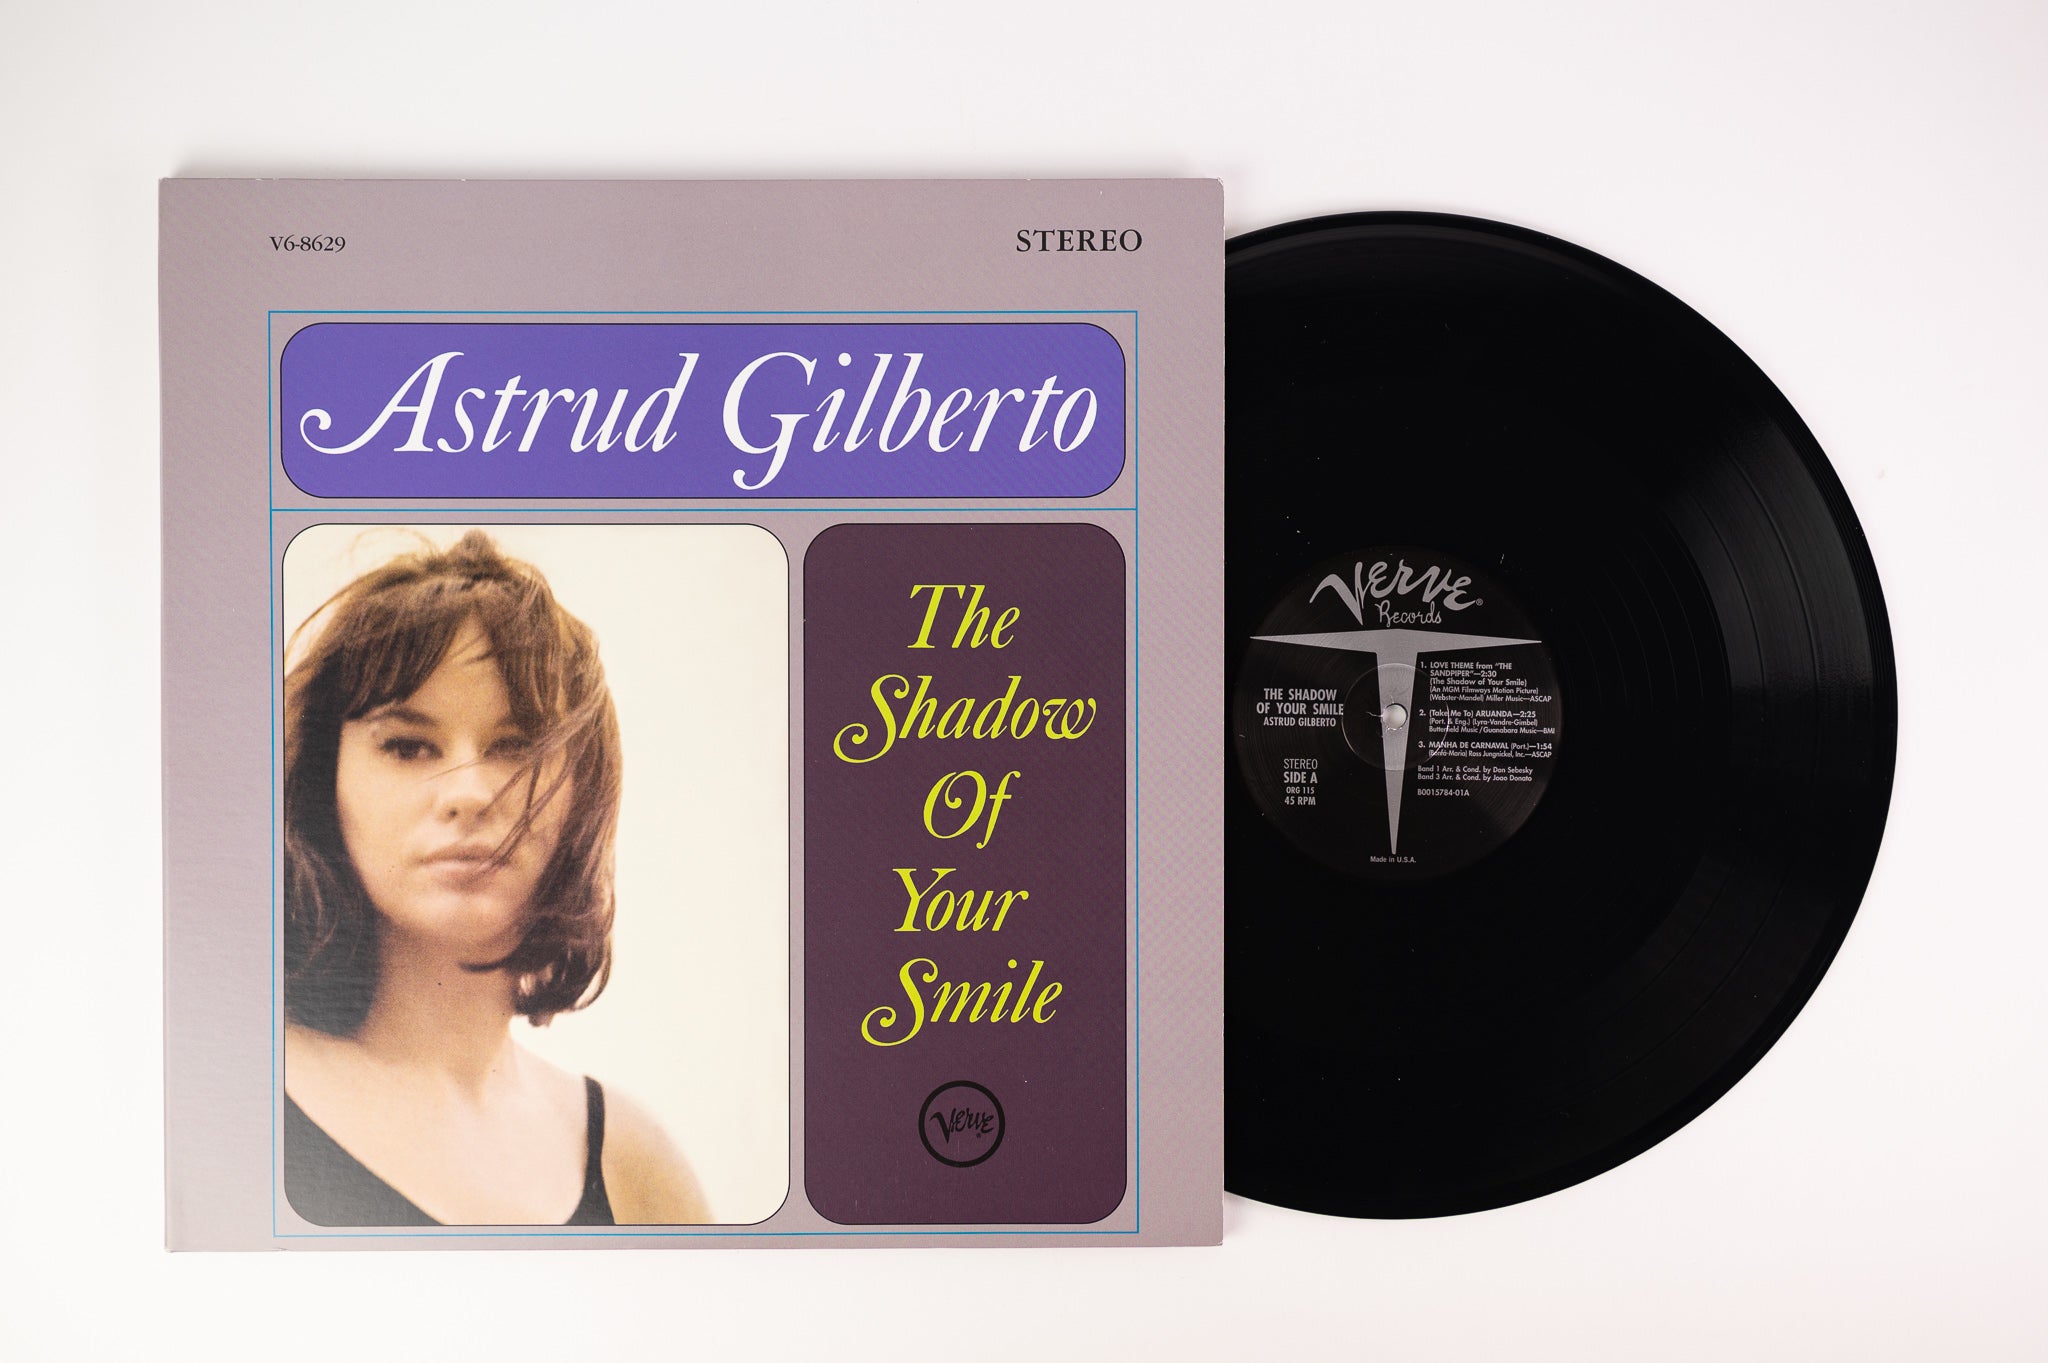 Astrud Gilberto - The Shadow Of Your Smile on Verve Original Recordings Group Ltd Numbered 180 Gram